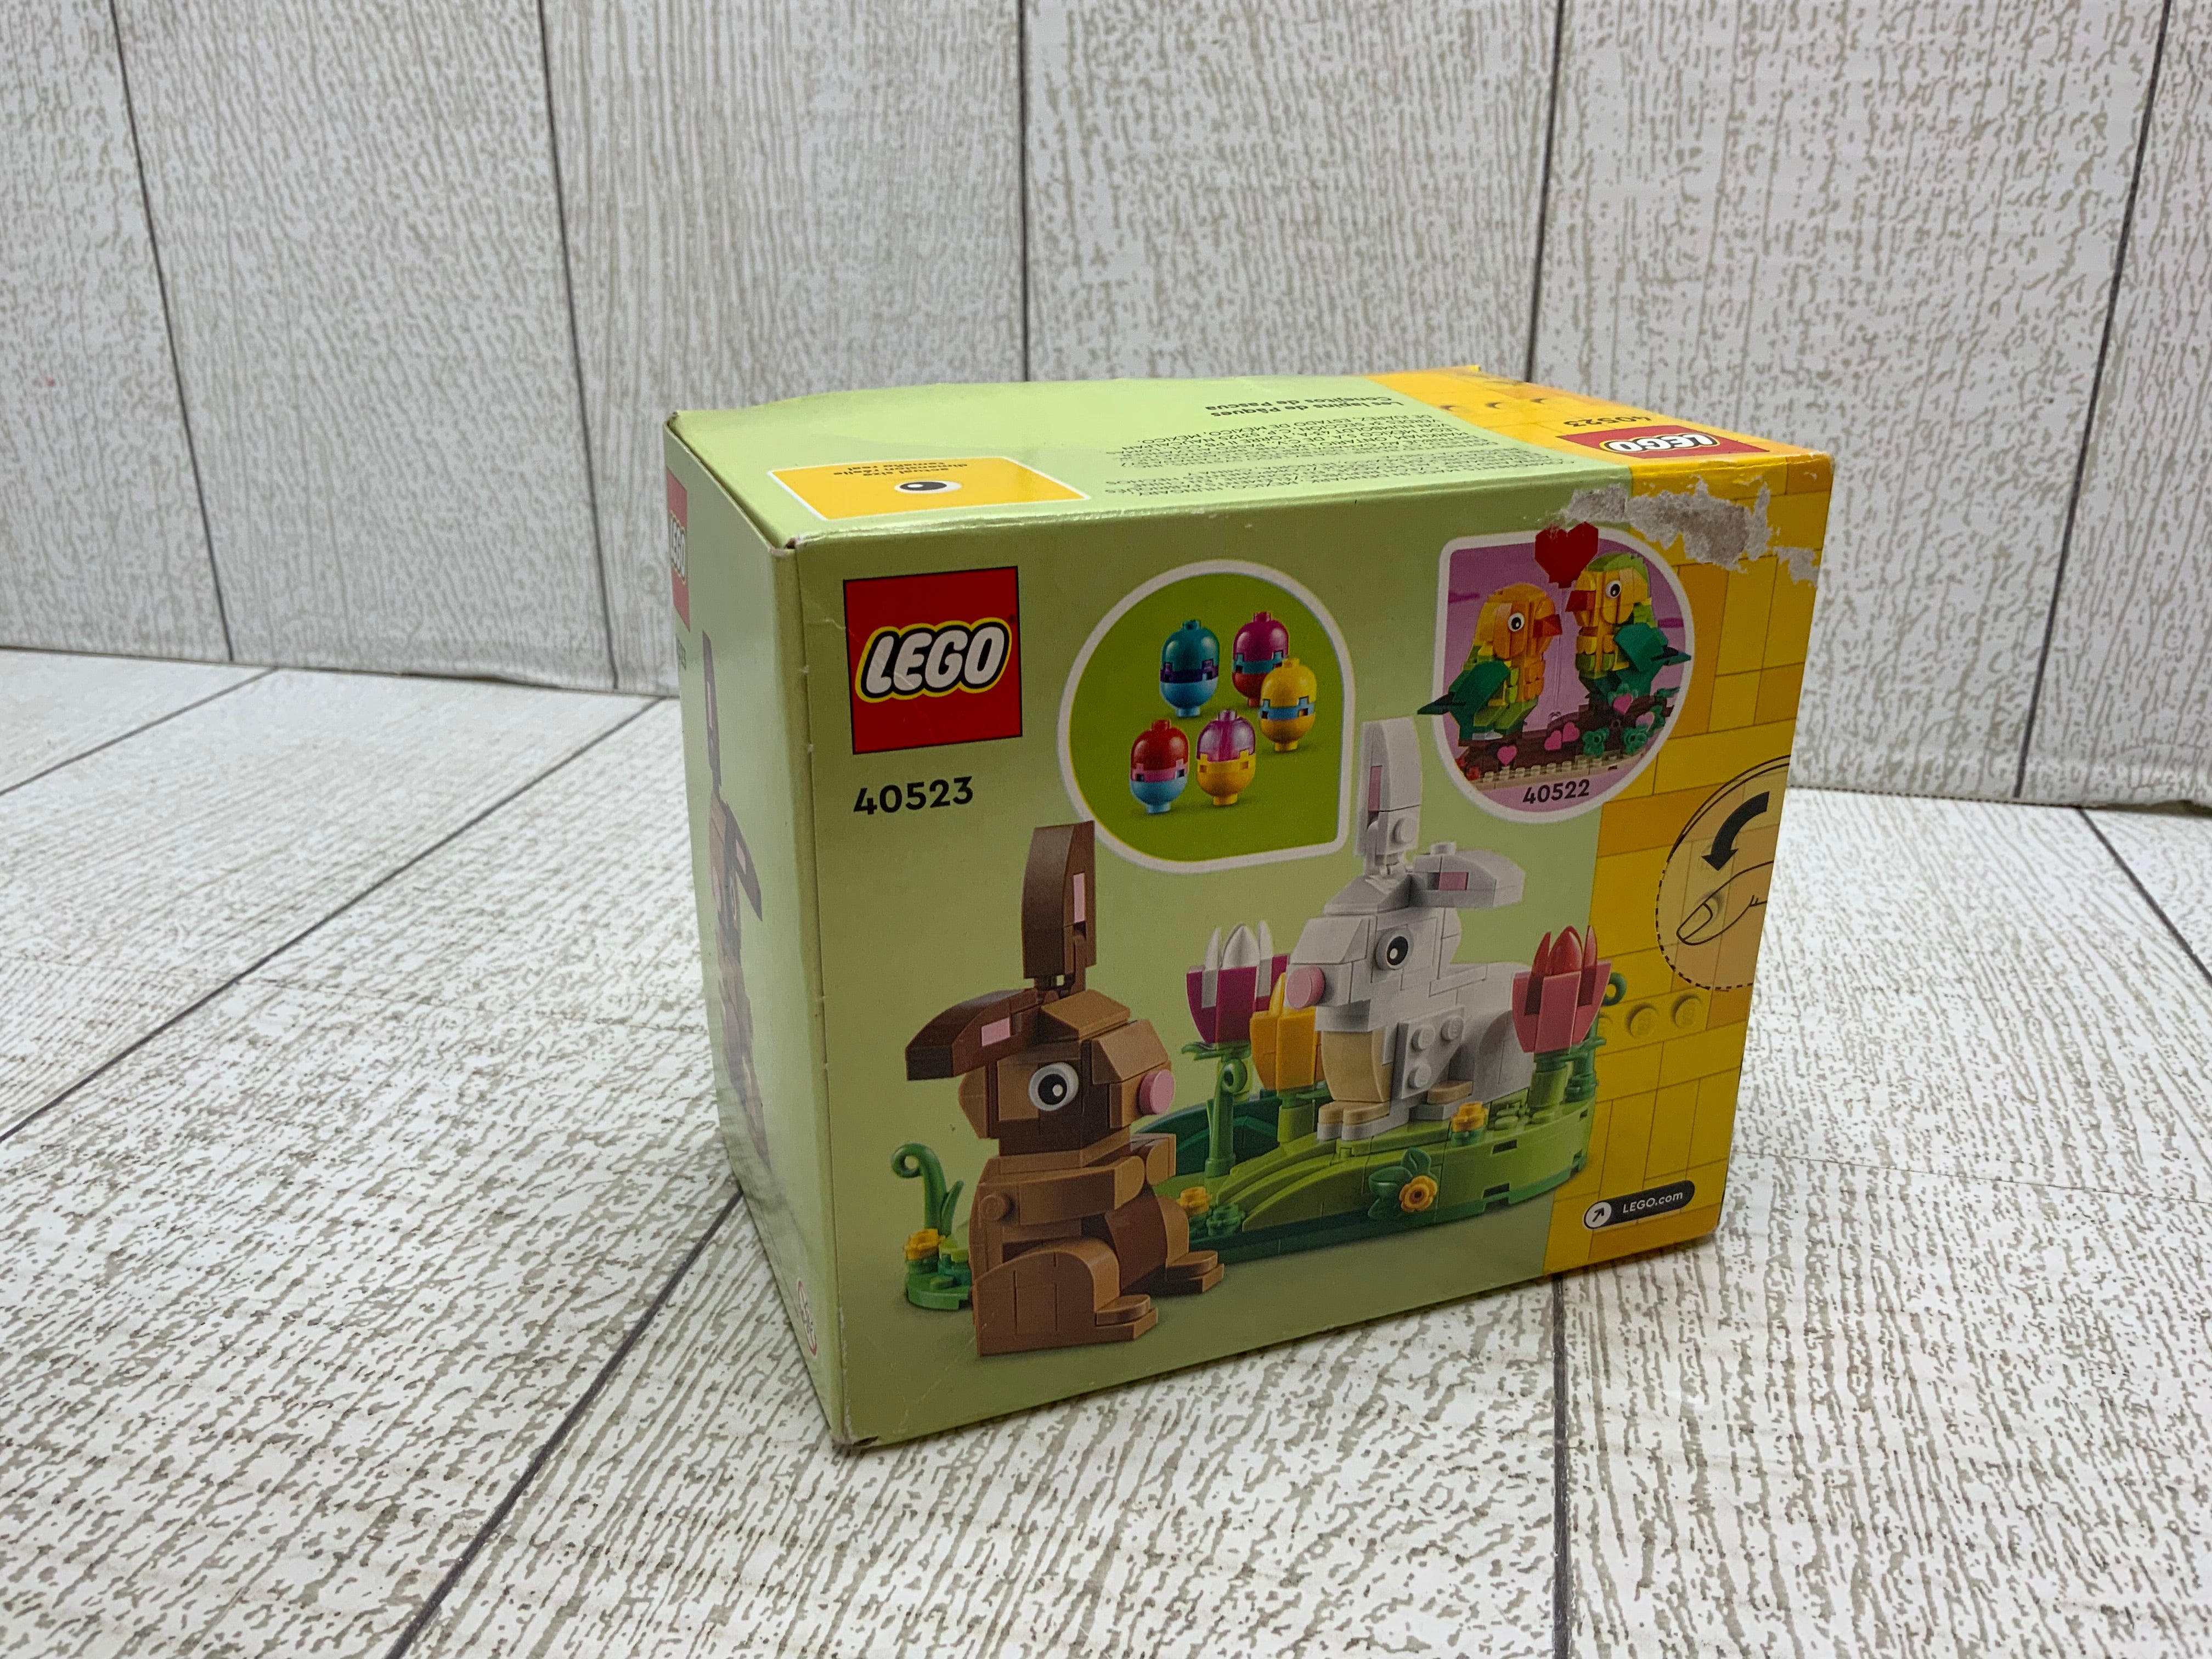 LEGO Easter Rabbits Display 40523 Building Toy Set (8047997190382)